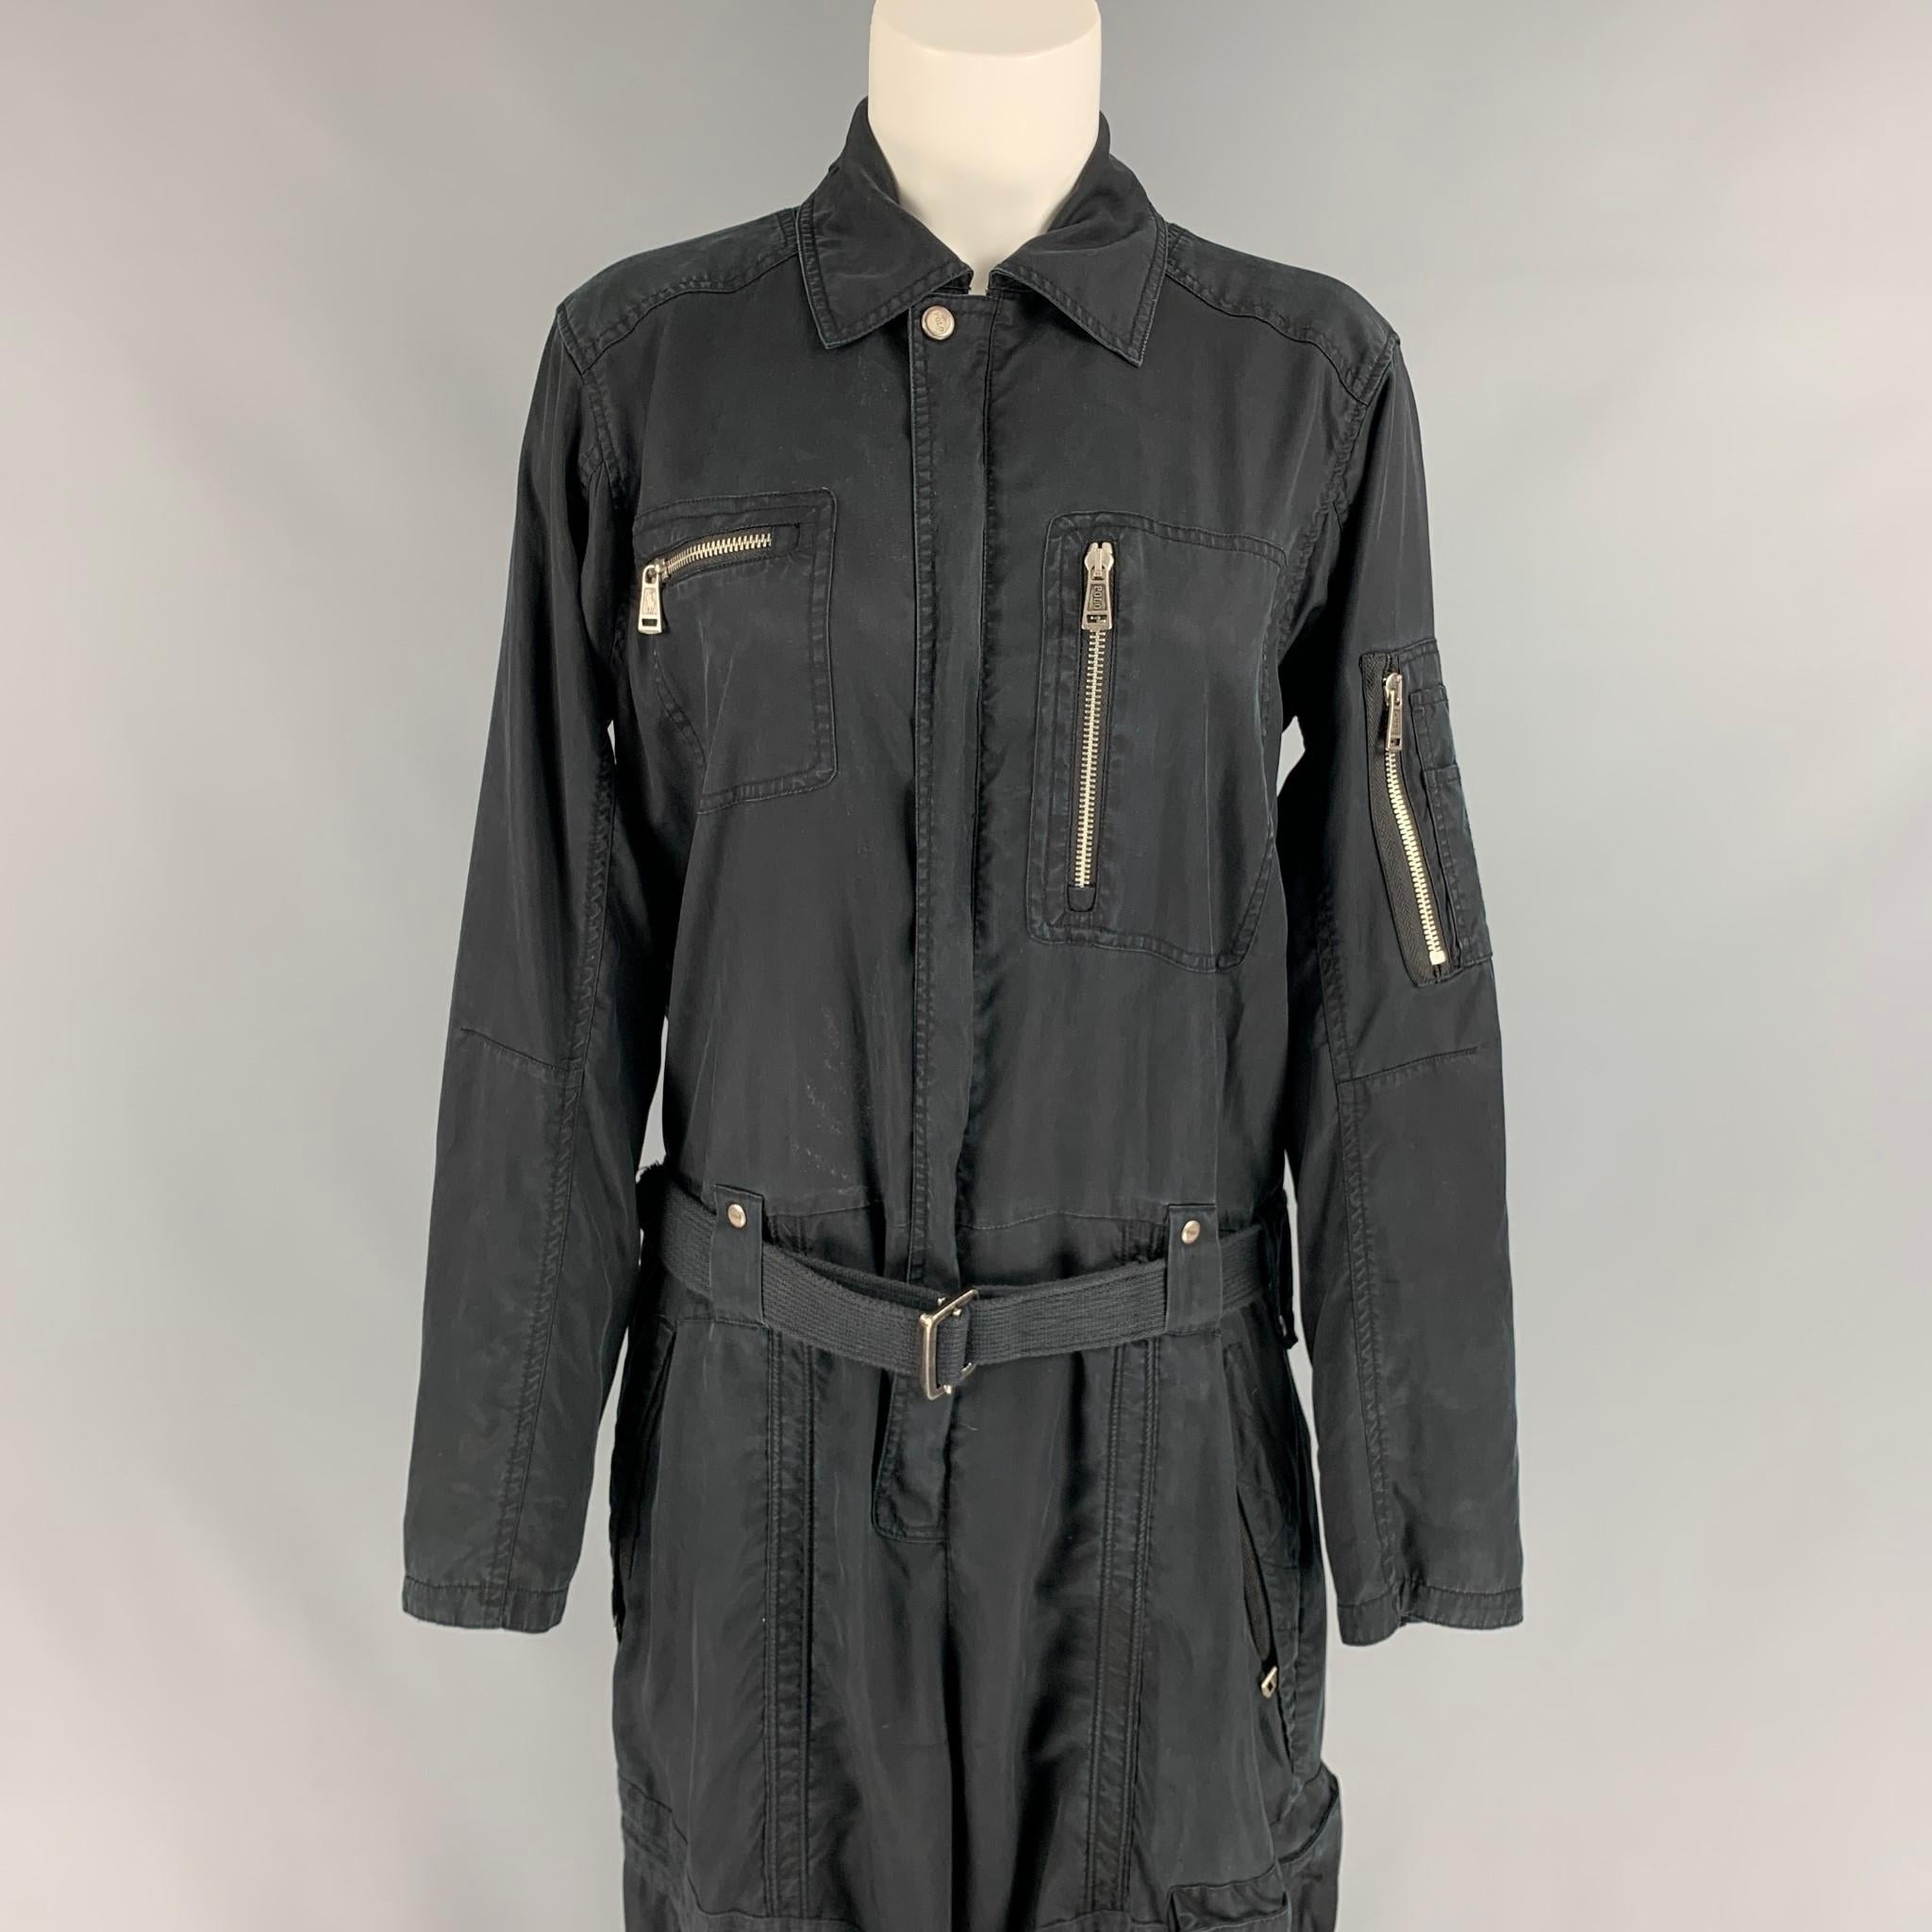 POLO by RALPH LAUREN jumpsuit comes in a black lyocell featuring a belted style, zipper pockets, silver tone hardware, leg strap details, and a hidden snap and full zip closure.

Good Pre-Owned Condition.
Marked: 6
Original Retail Price: